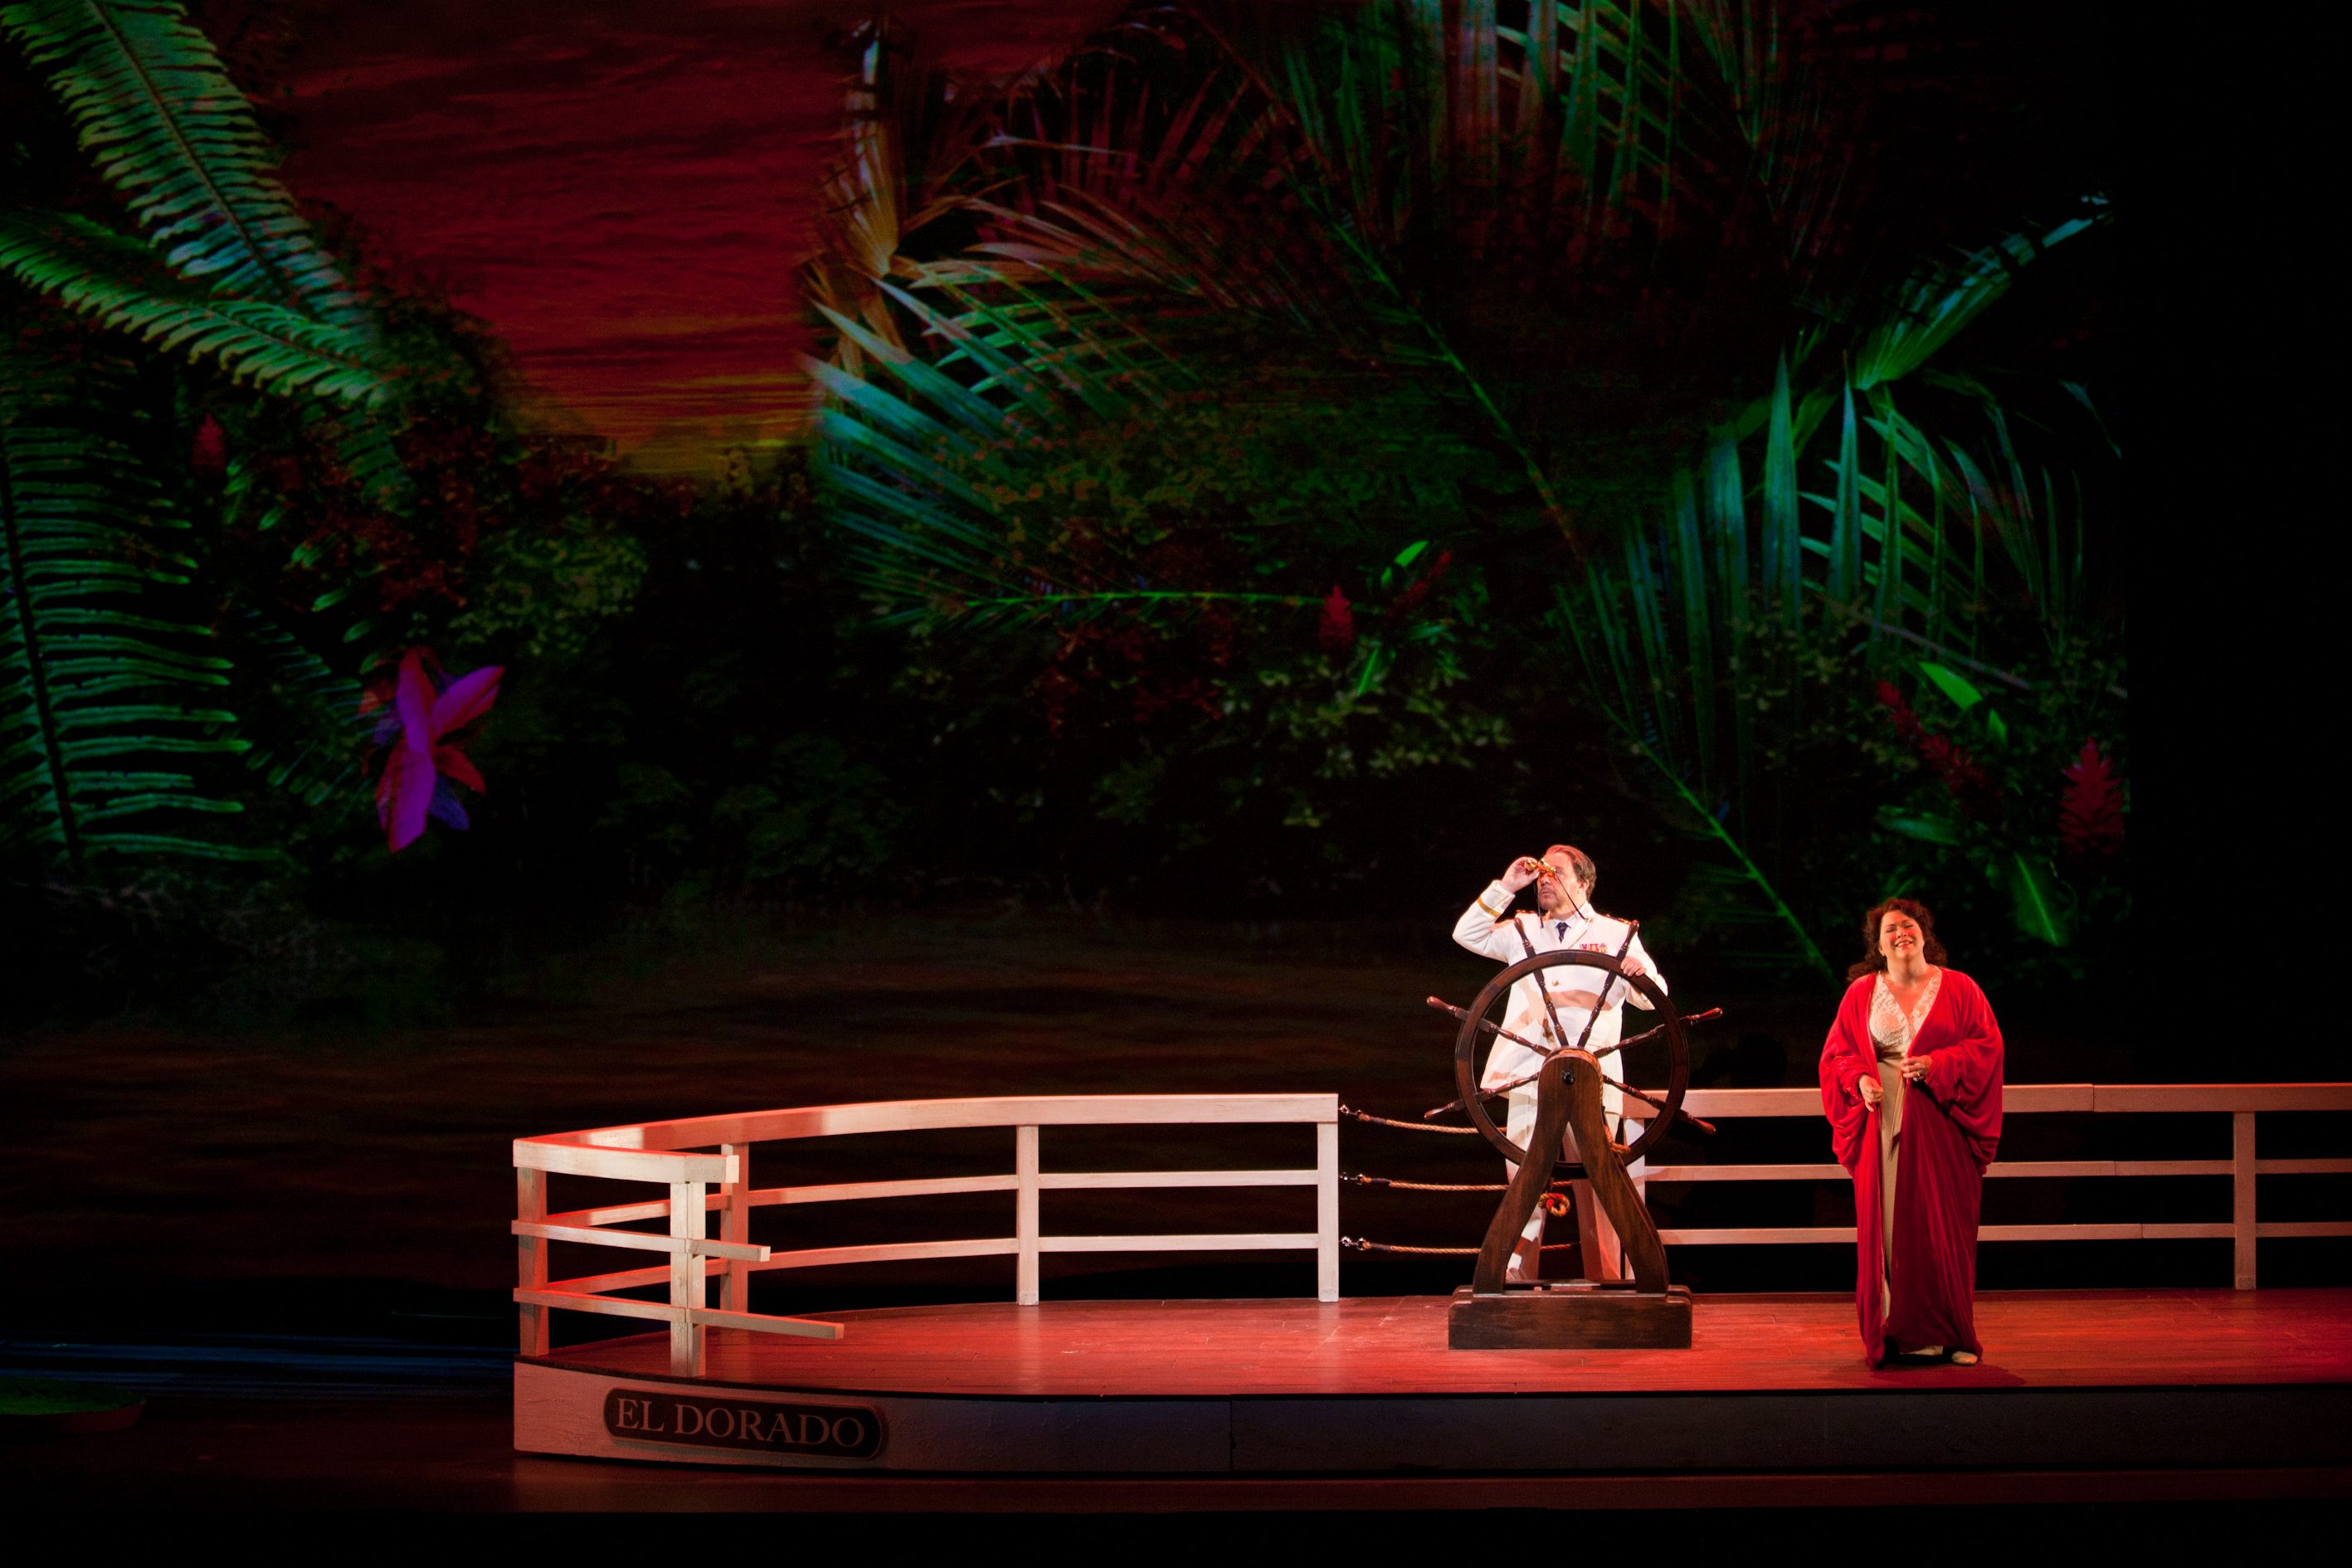 A magical river cruise flows through 'Florencia en el Amazonas' at Pittsburgh Opera. This scene is from a 2012 production at Opera Colorado. (photo: Matthew Staver)